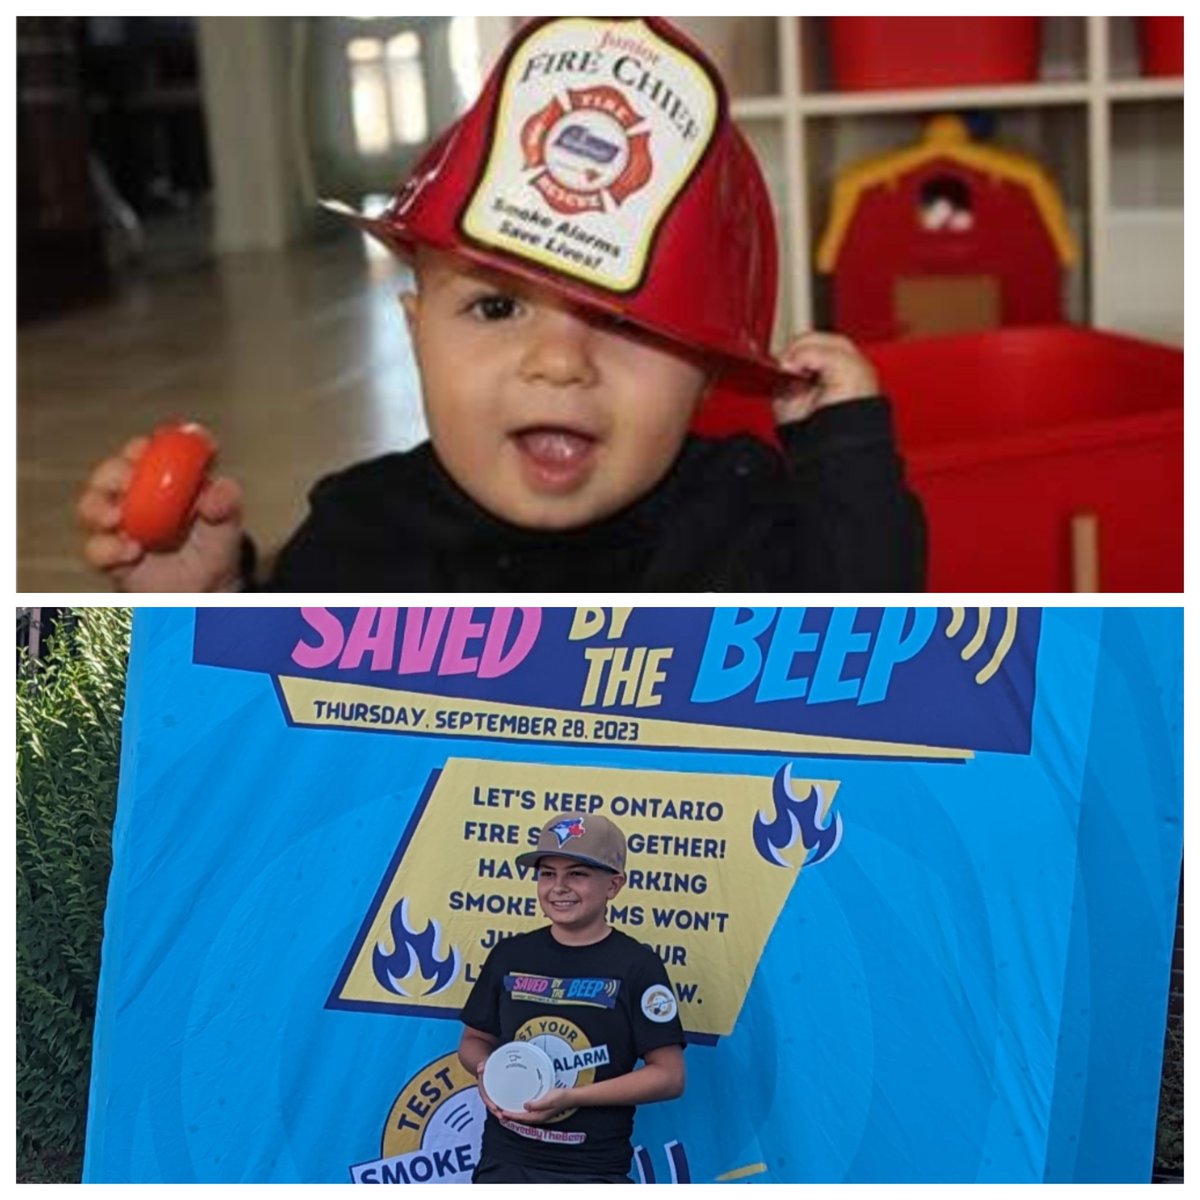 My little fire safety ambassador isn't so little anymore and turns the Big 13 today!  He's always willing to help promote the fire safety message which is what we need from today's youth!  Happy Birthday Matthew! #SavedByTheBeep #TakeYourKidToWorkDay